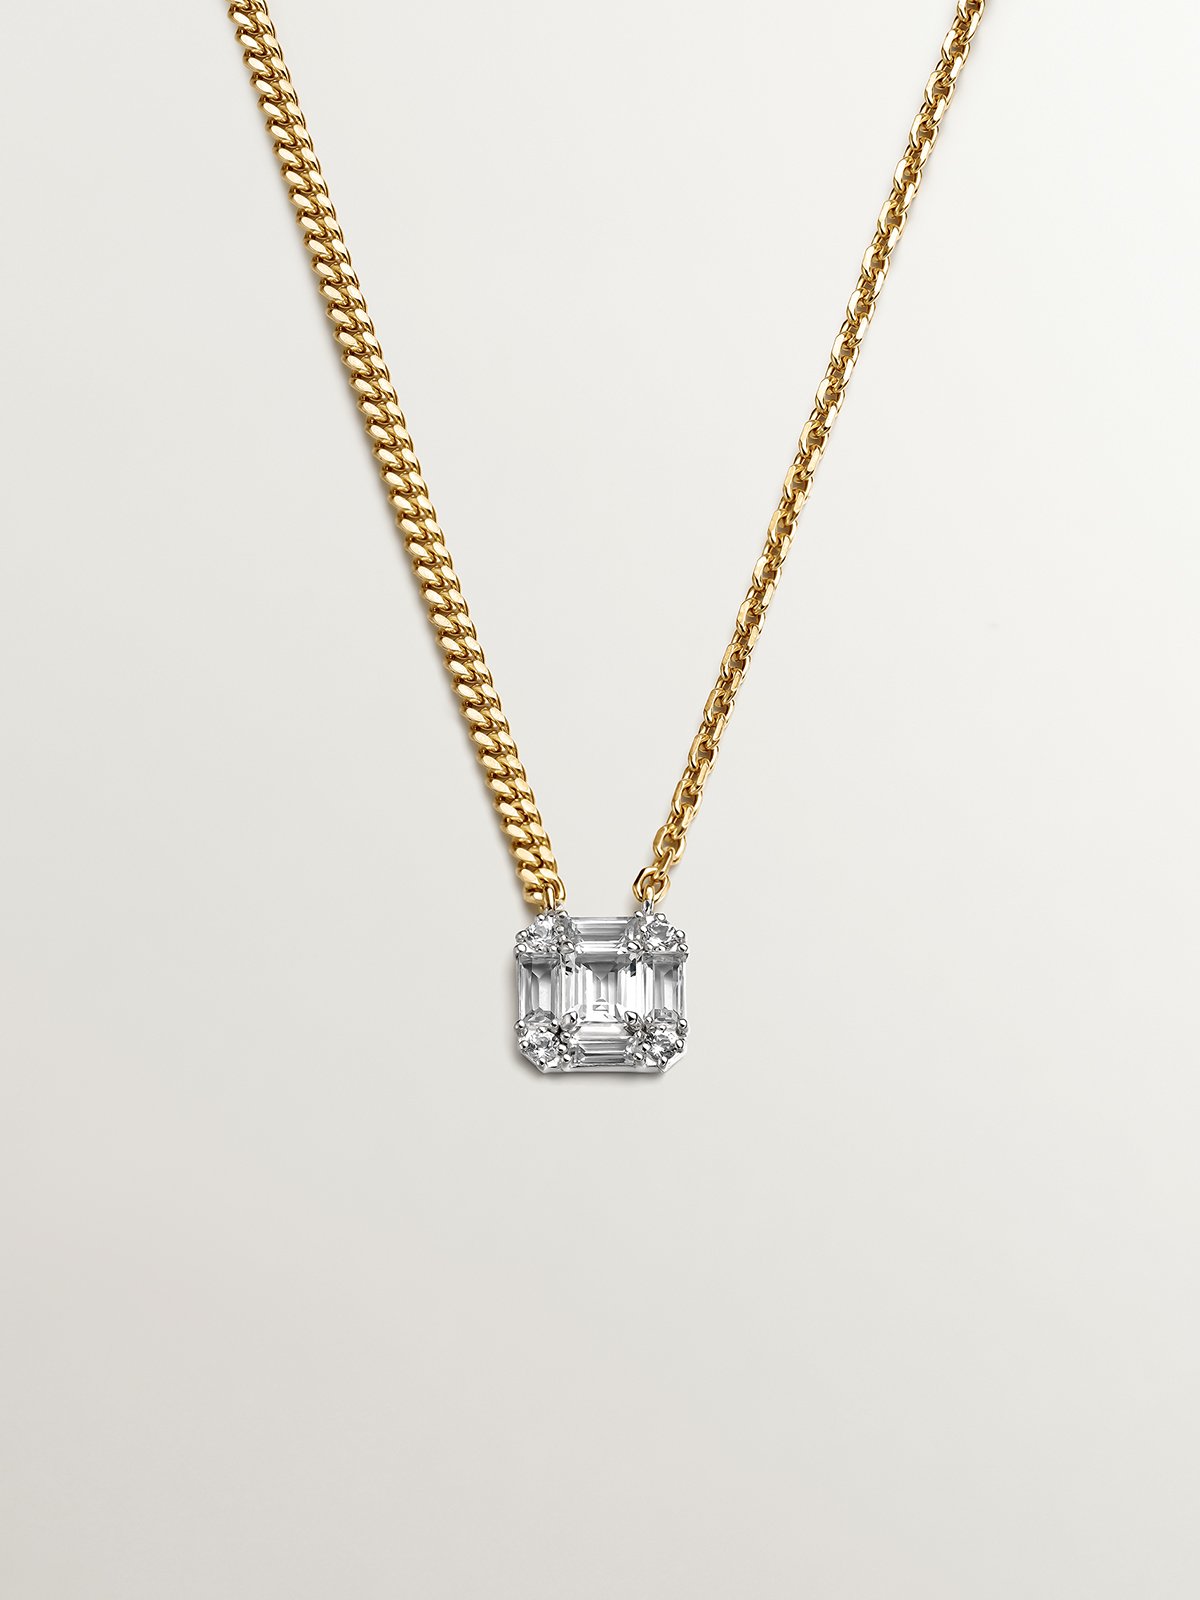 925 Silver necklace plated in 18K yellow gold with white topazes